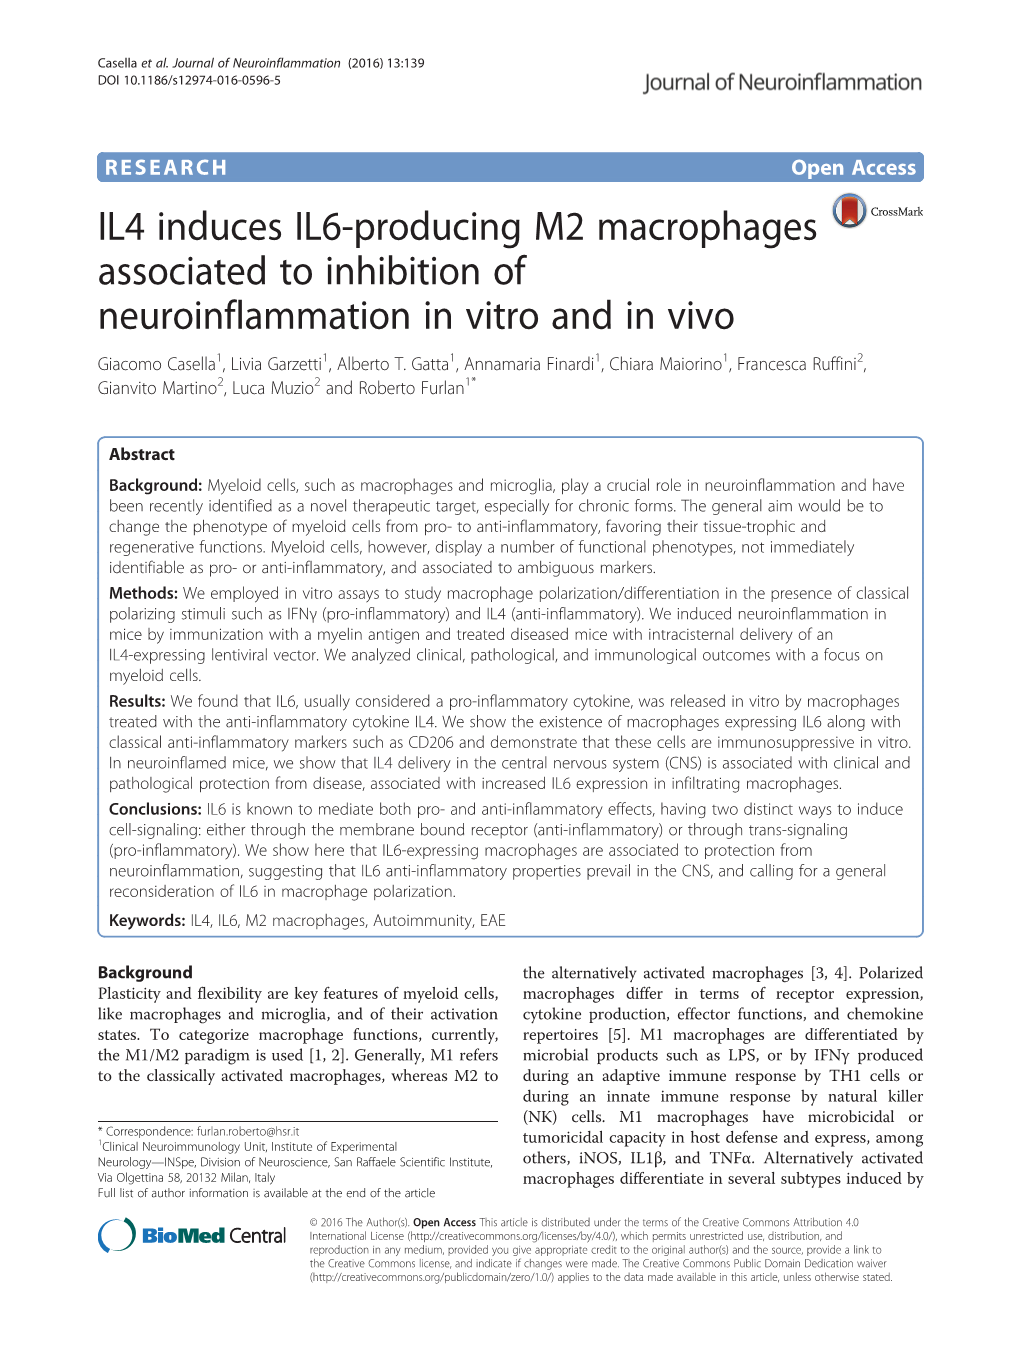 IL4 Induces IL6-Producing M2 Macrophages Associated to Inhibition of Neuroinflammation in Vitro and in Vivo Giacomo Casella1, Livia Garzetti1, Alberto T